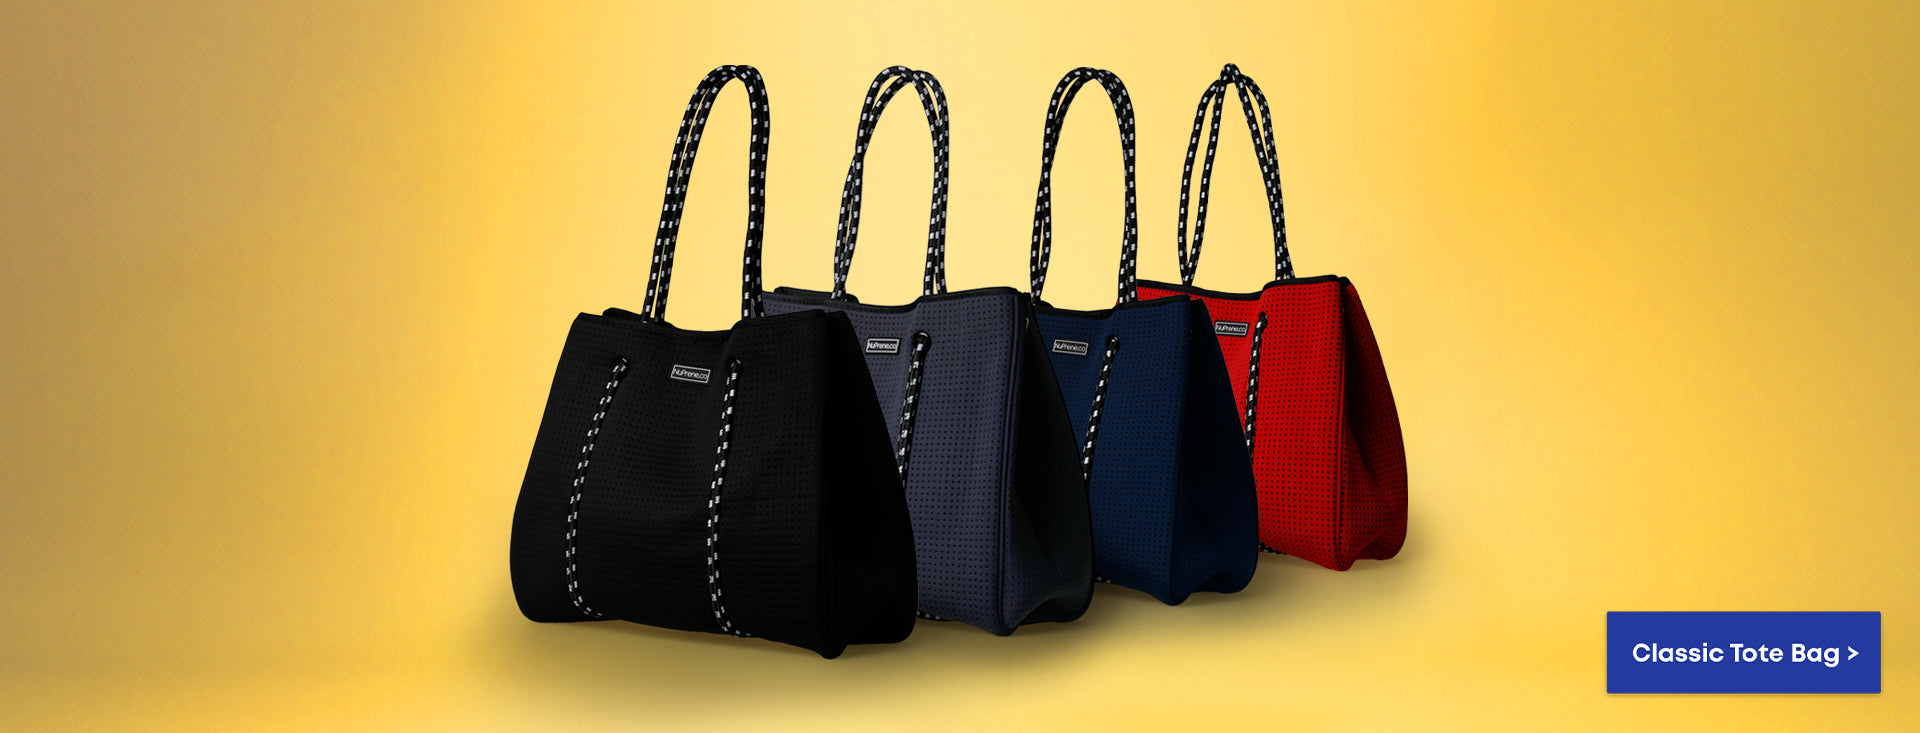 Neoprene bags are perfect for everyone. Shop now. Link in bio. #neopre